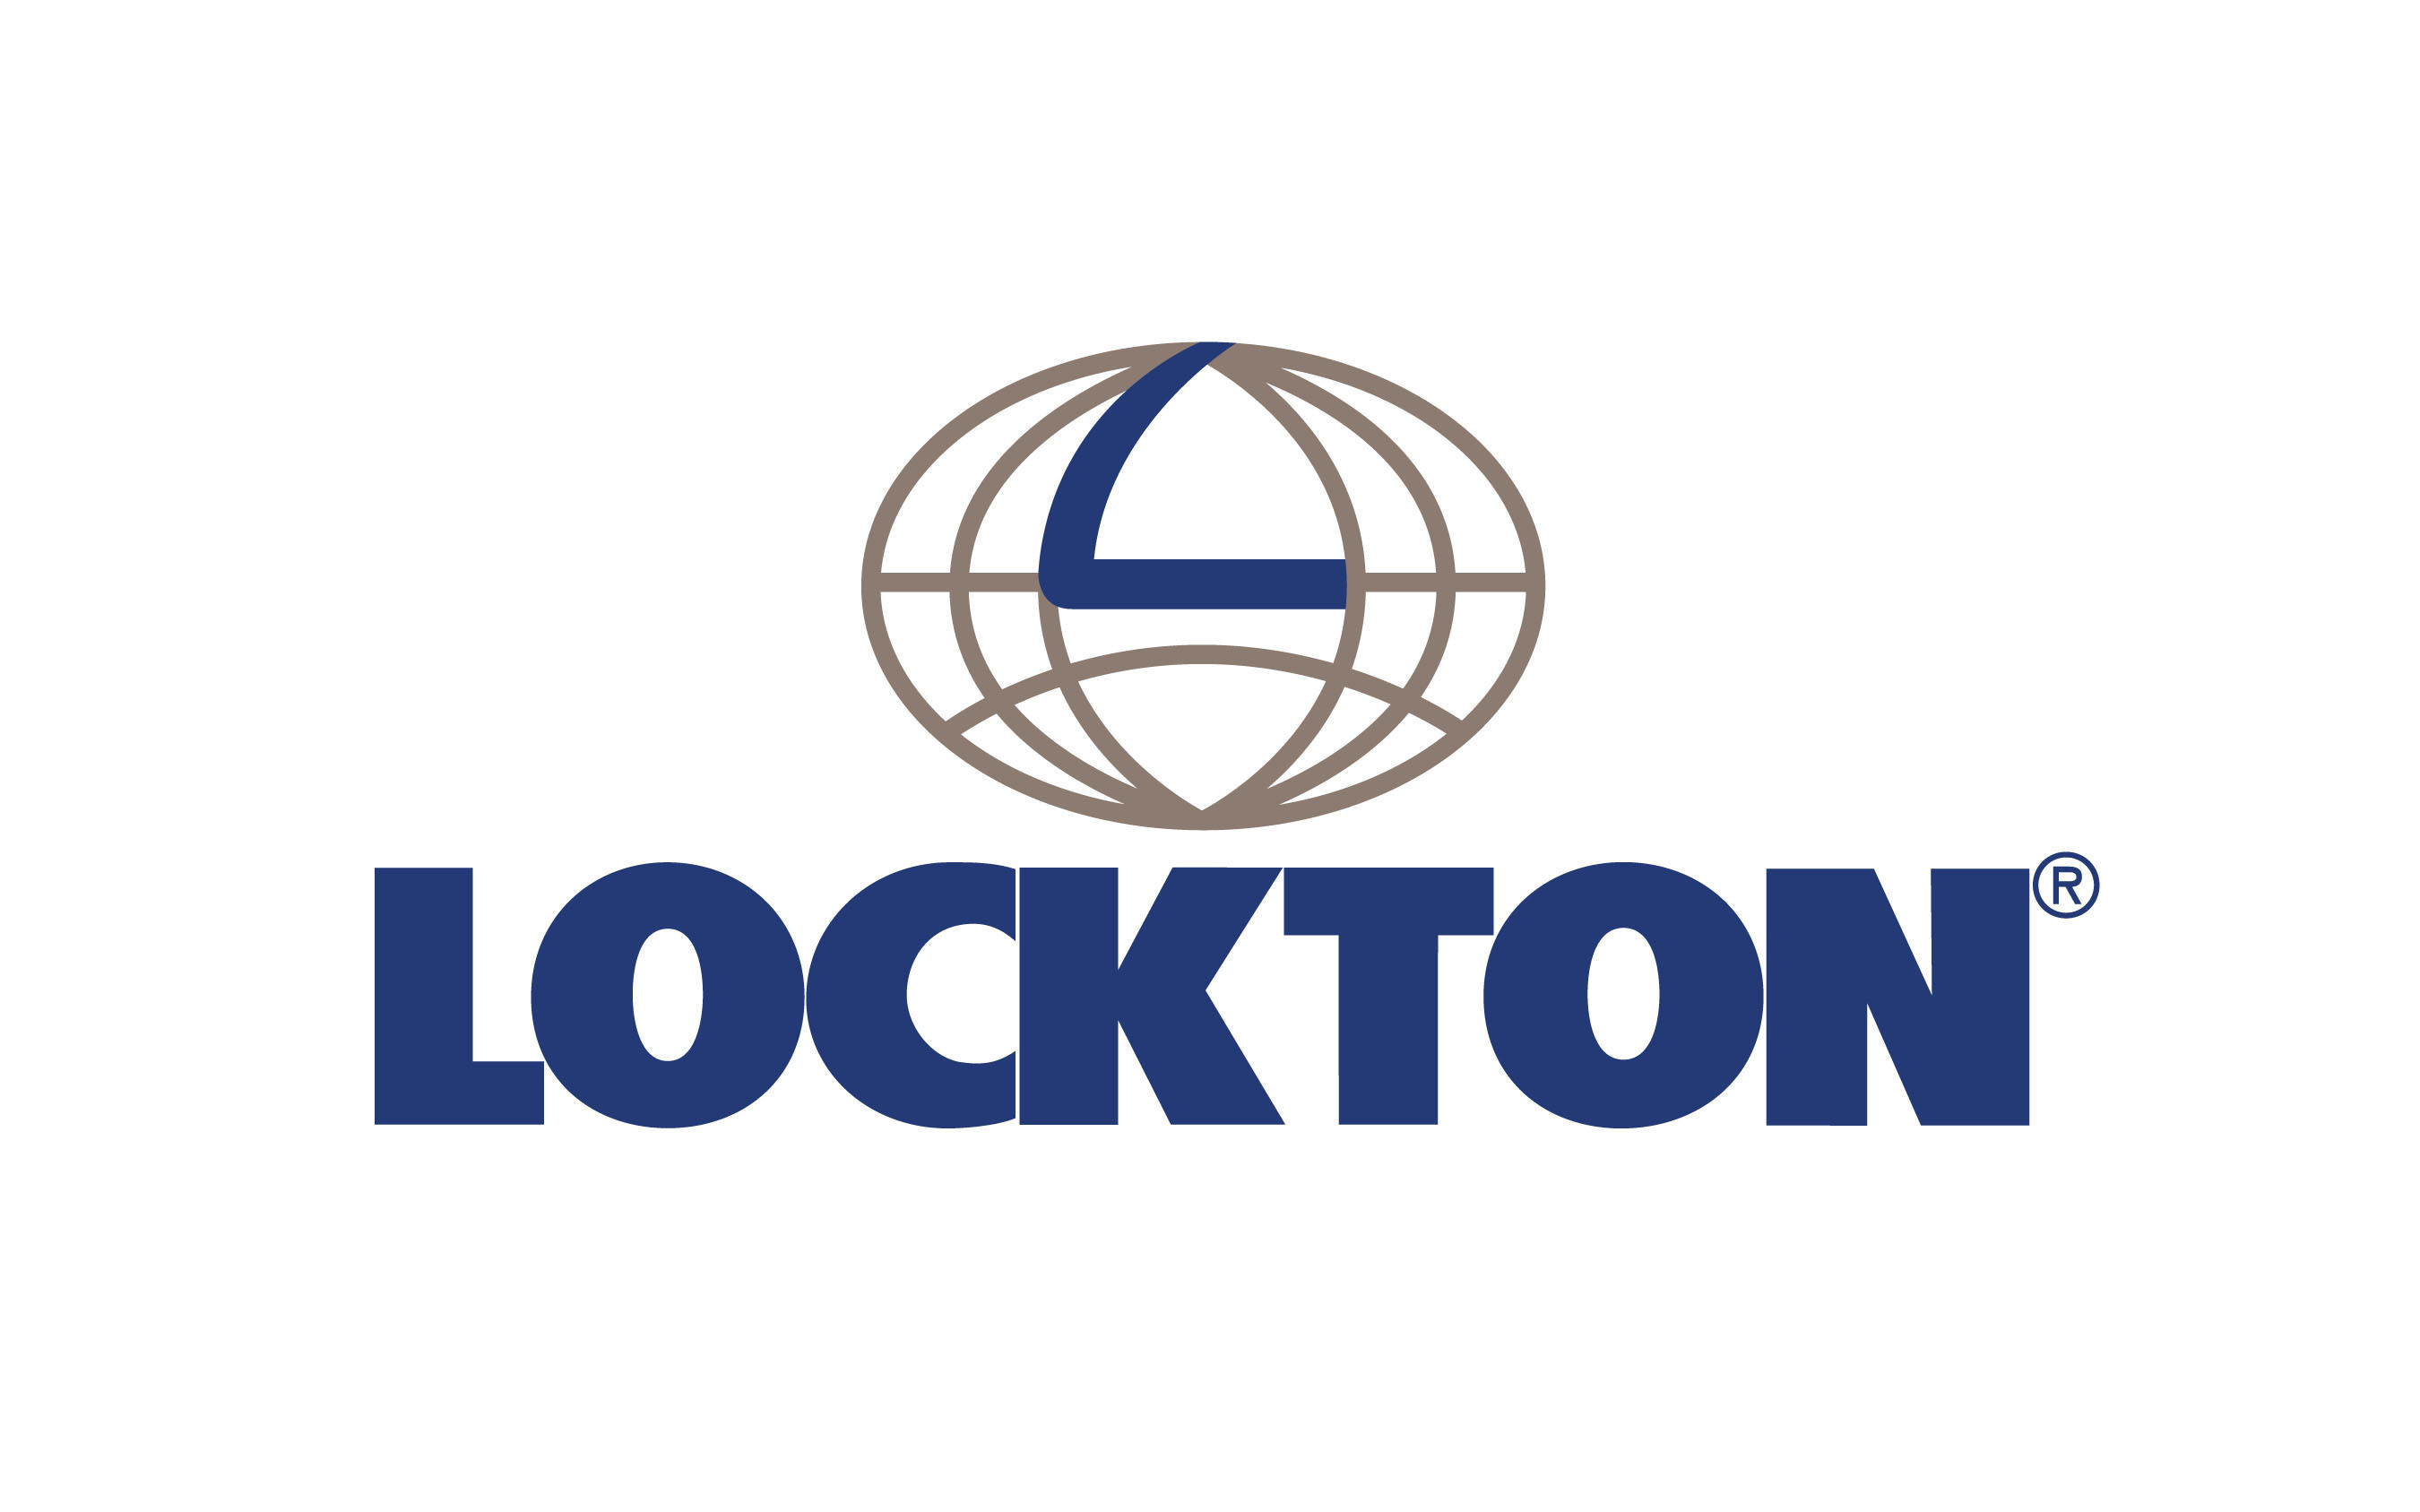 COVID-19 impacts UK manufacturers supply chain for Brexit: Lockton